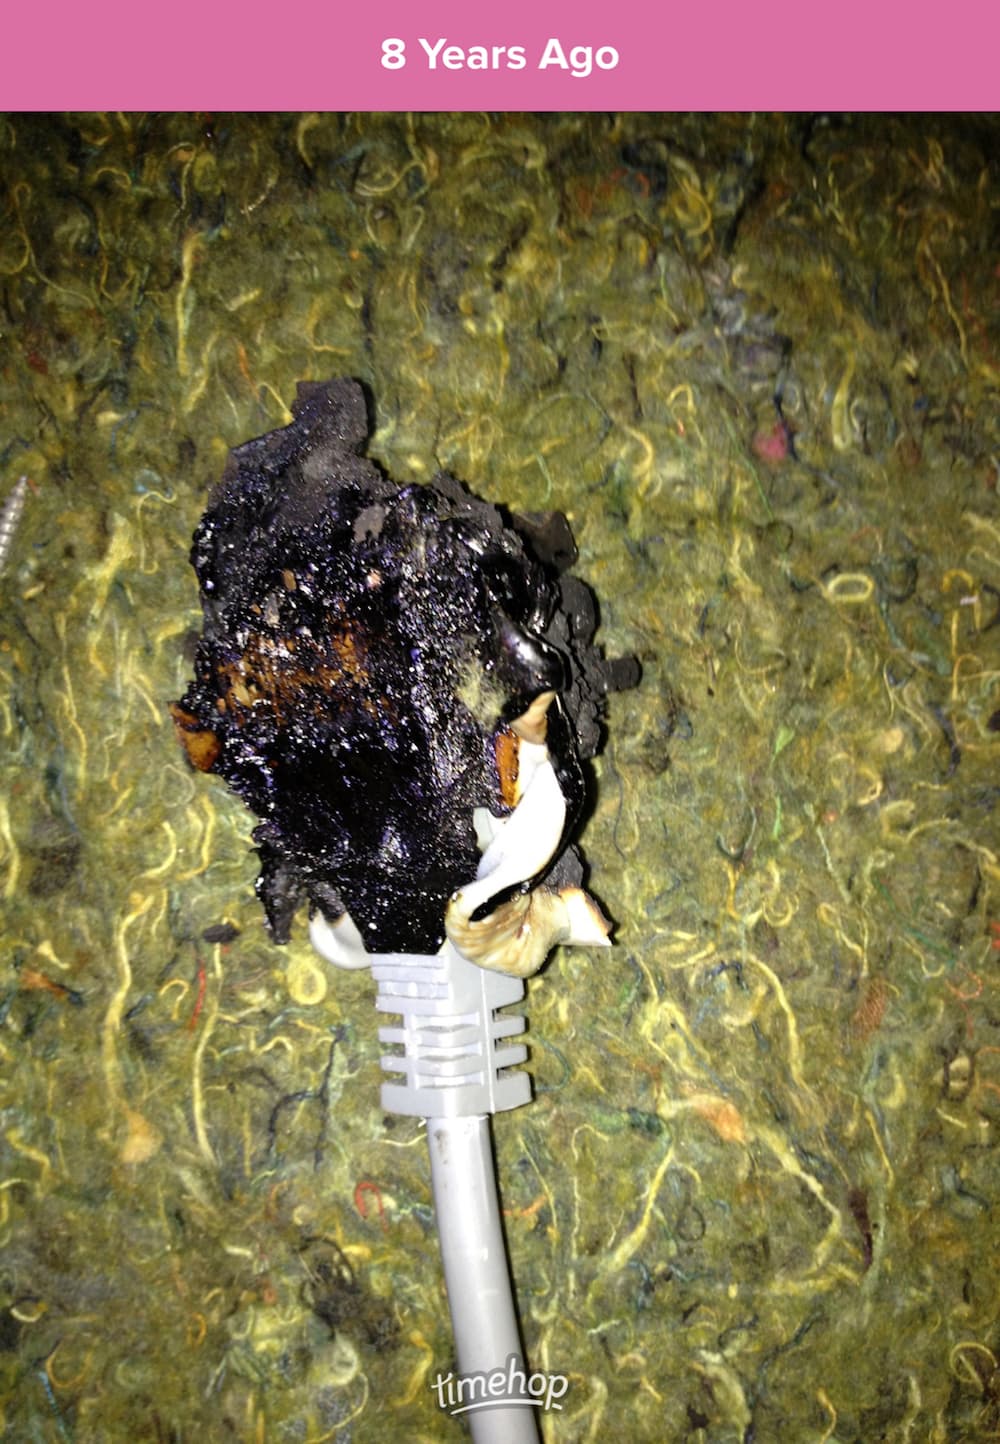 A completely burned out plug